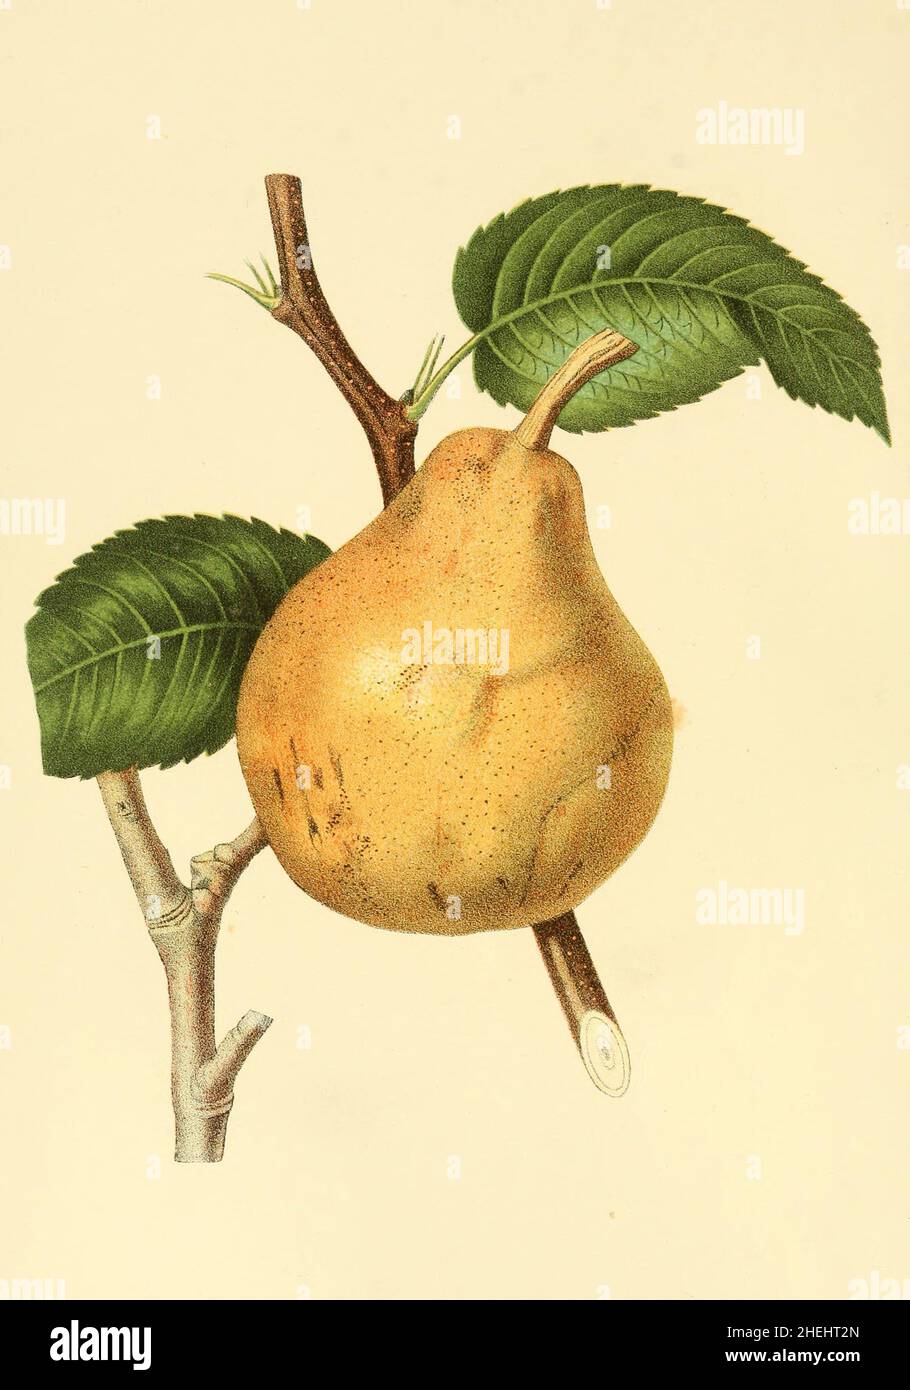 The Glou Morceau Pear, Glou Morceau was one of the first pears bred in Belgium and was created by Abbe Hardenpont, a prominent breeder, in Mons, Belgium in the 1750s, Historisch, historical, digital improved reproduction of an original from the 19th century / digital restaurierte Reproduktion einer Originalvorlage aus dem 19. Jahrhundert, genaues Originaldatum nicht bekannt, The fruits of America, C.M. Hovey, ca 1856 Stock Photo